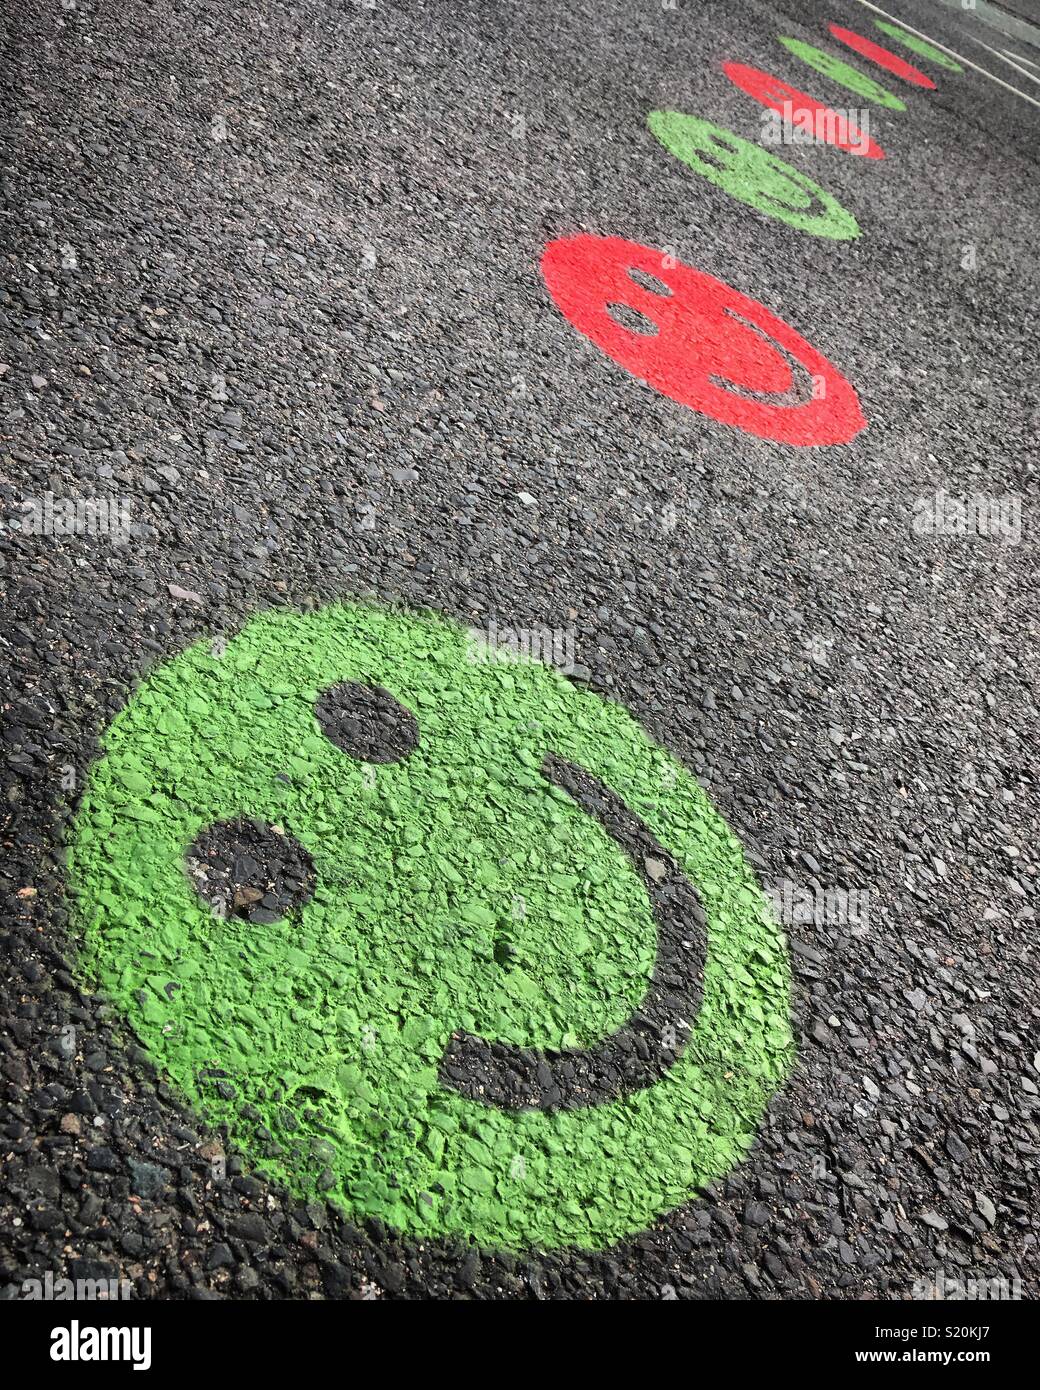 Green and red smiley faces on the road, leftovers from Southampton Half Marathon pitting on a brave face Stock Photo